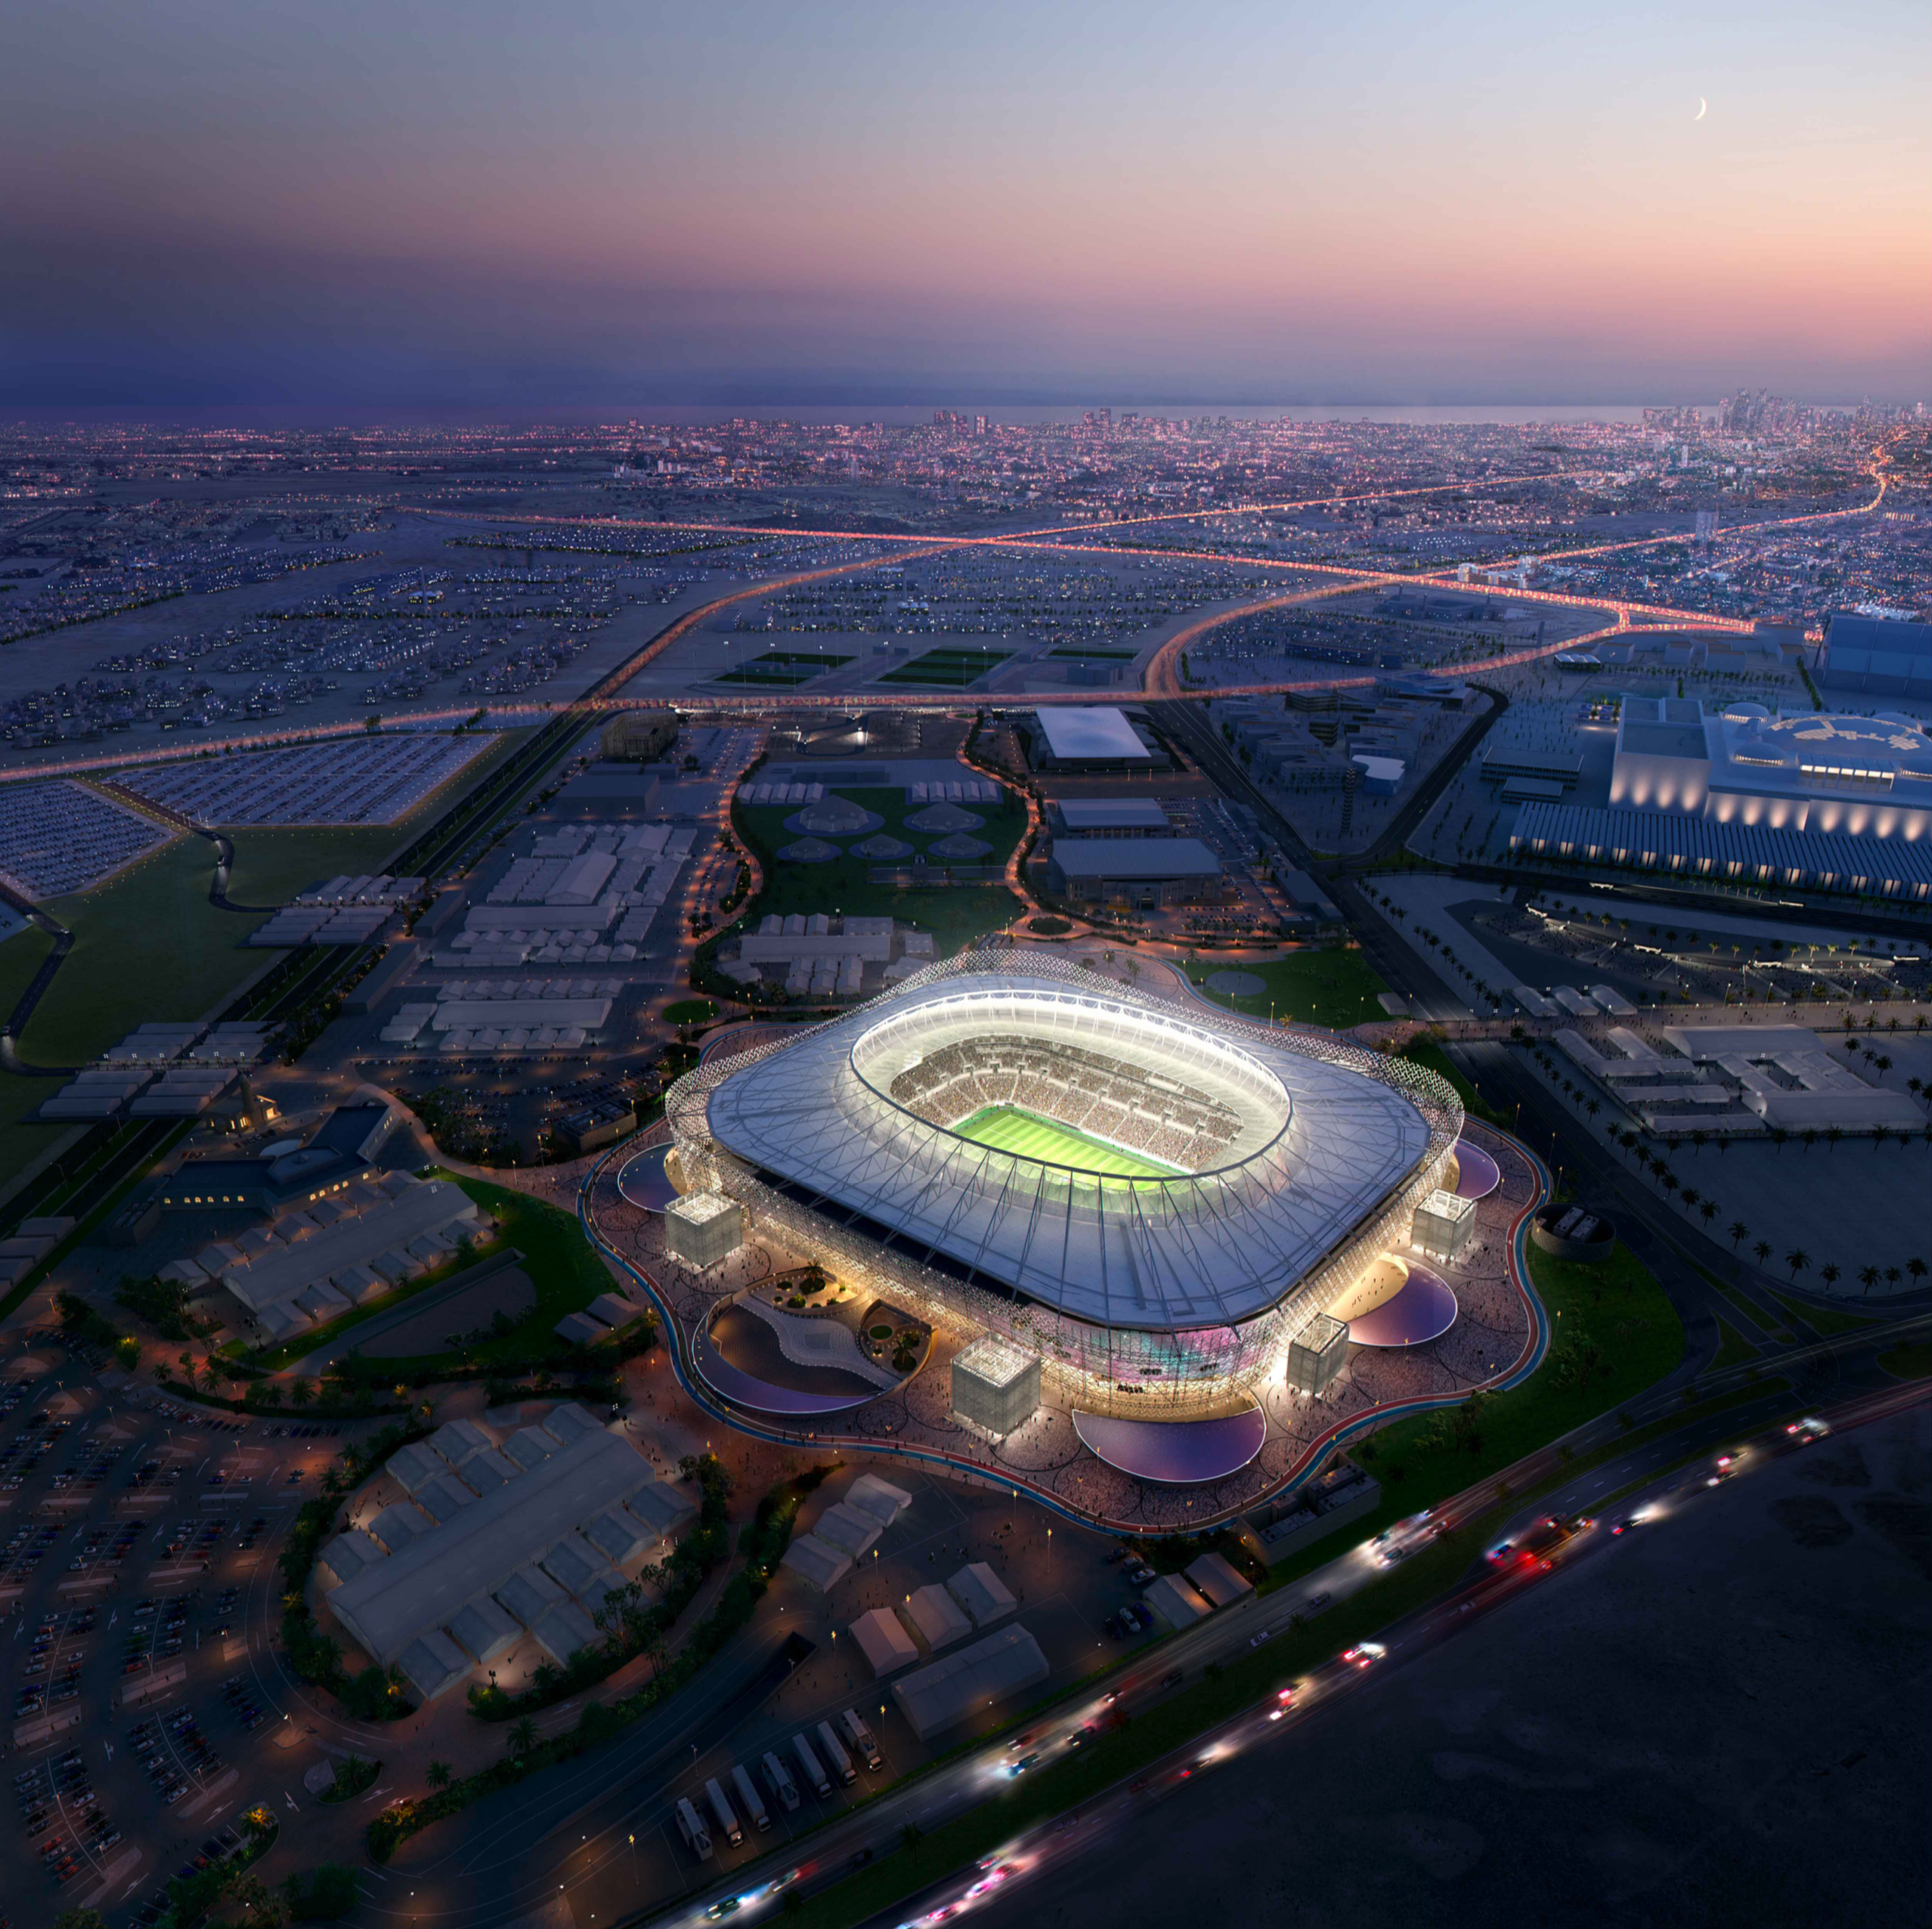 Qatar Stadion / Commercial bank of qatar is situated 730 metres